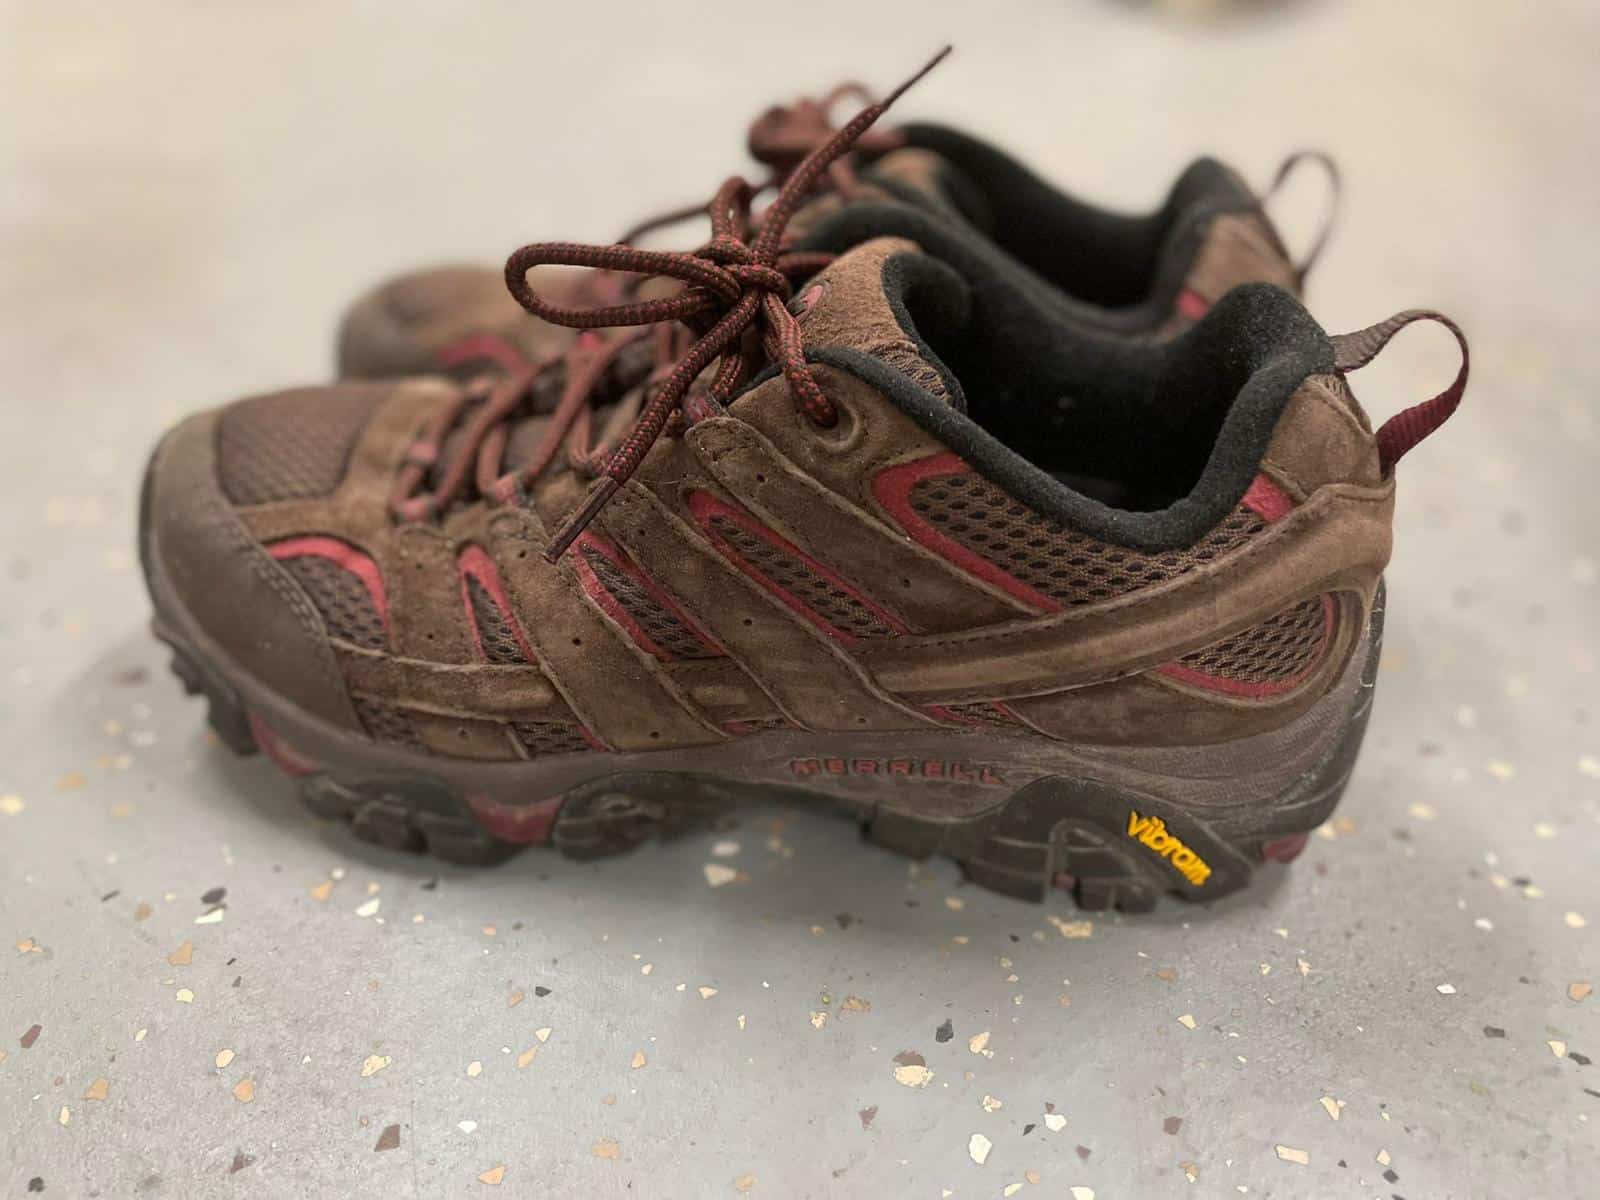 My Merrell Moab 2 Vents after rigorous use - Best Hiking Shoes under 100 dollars